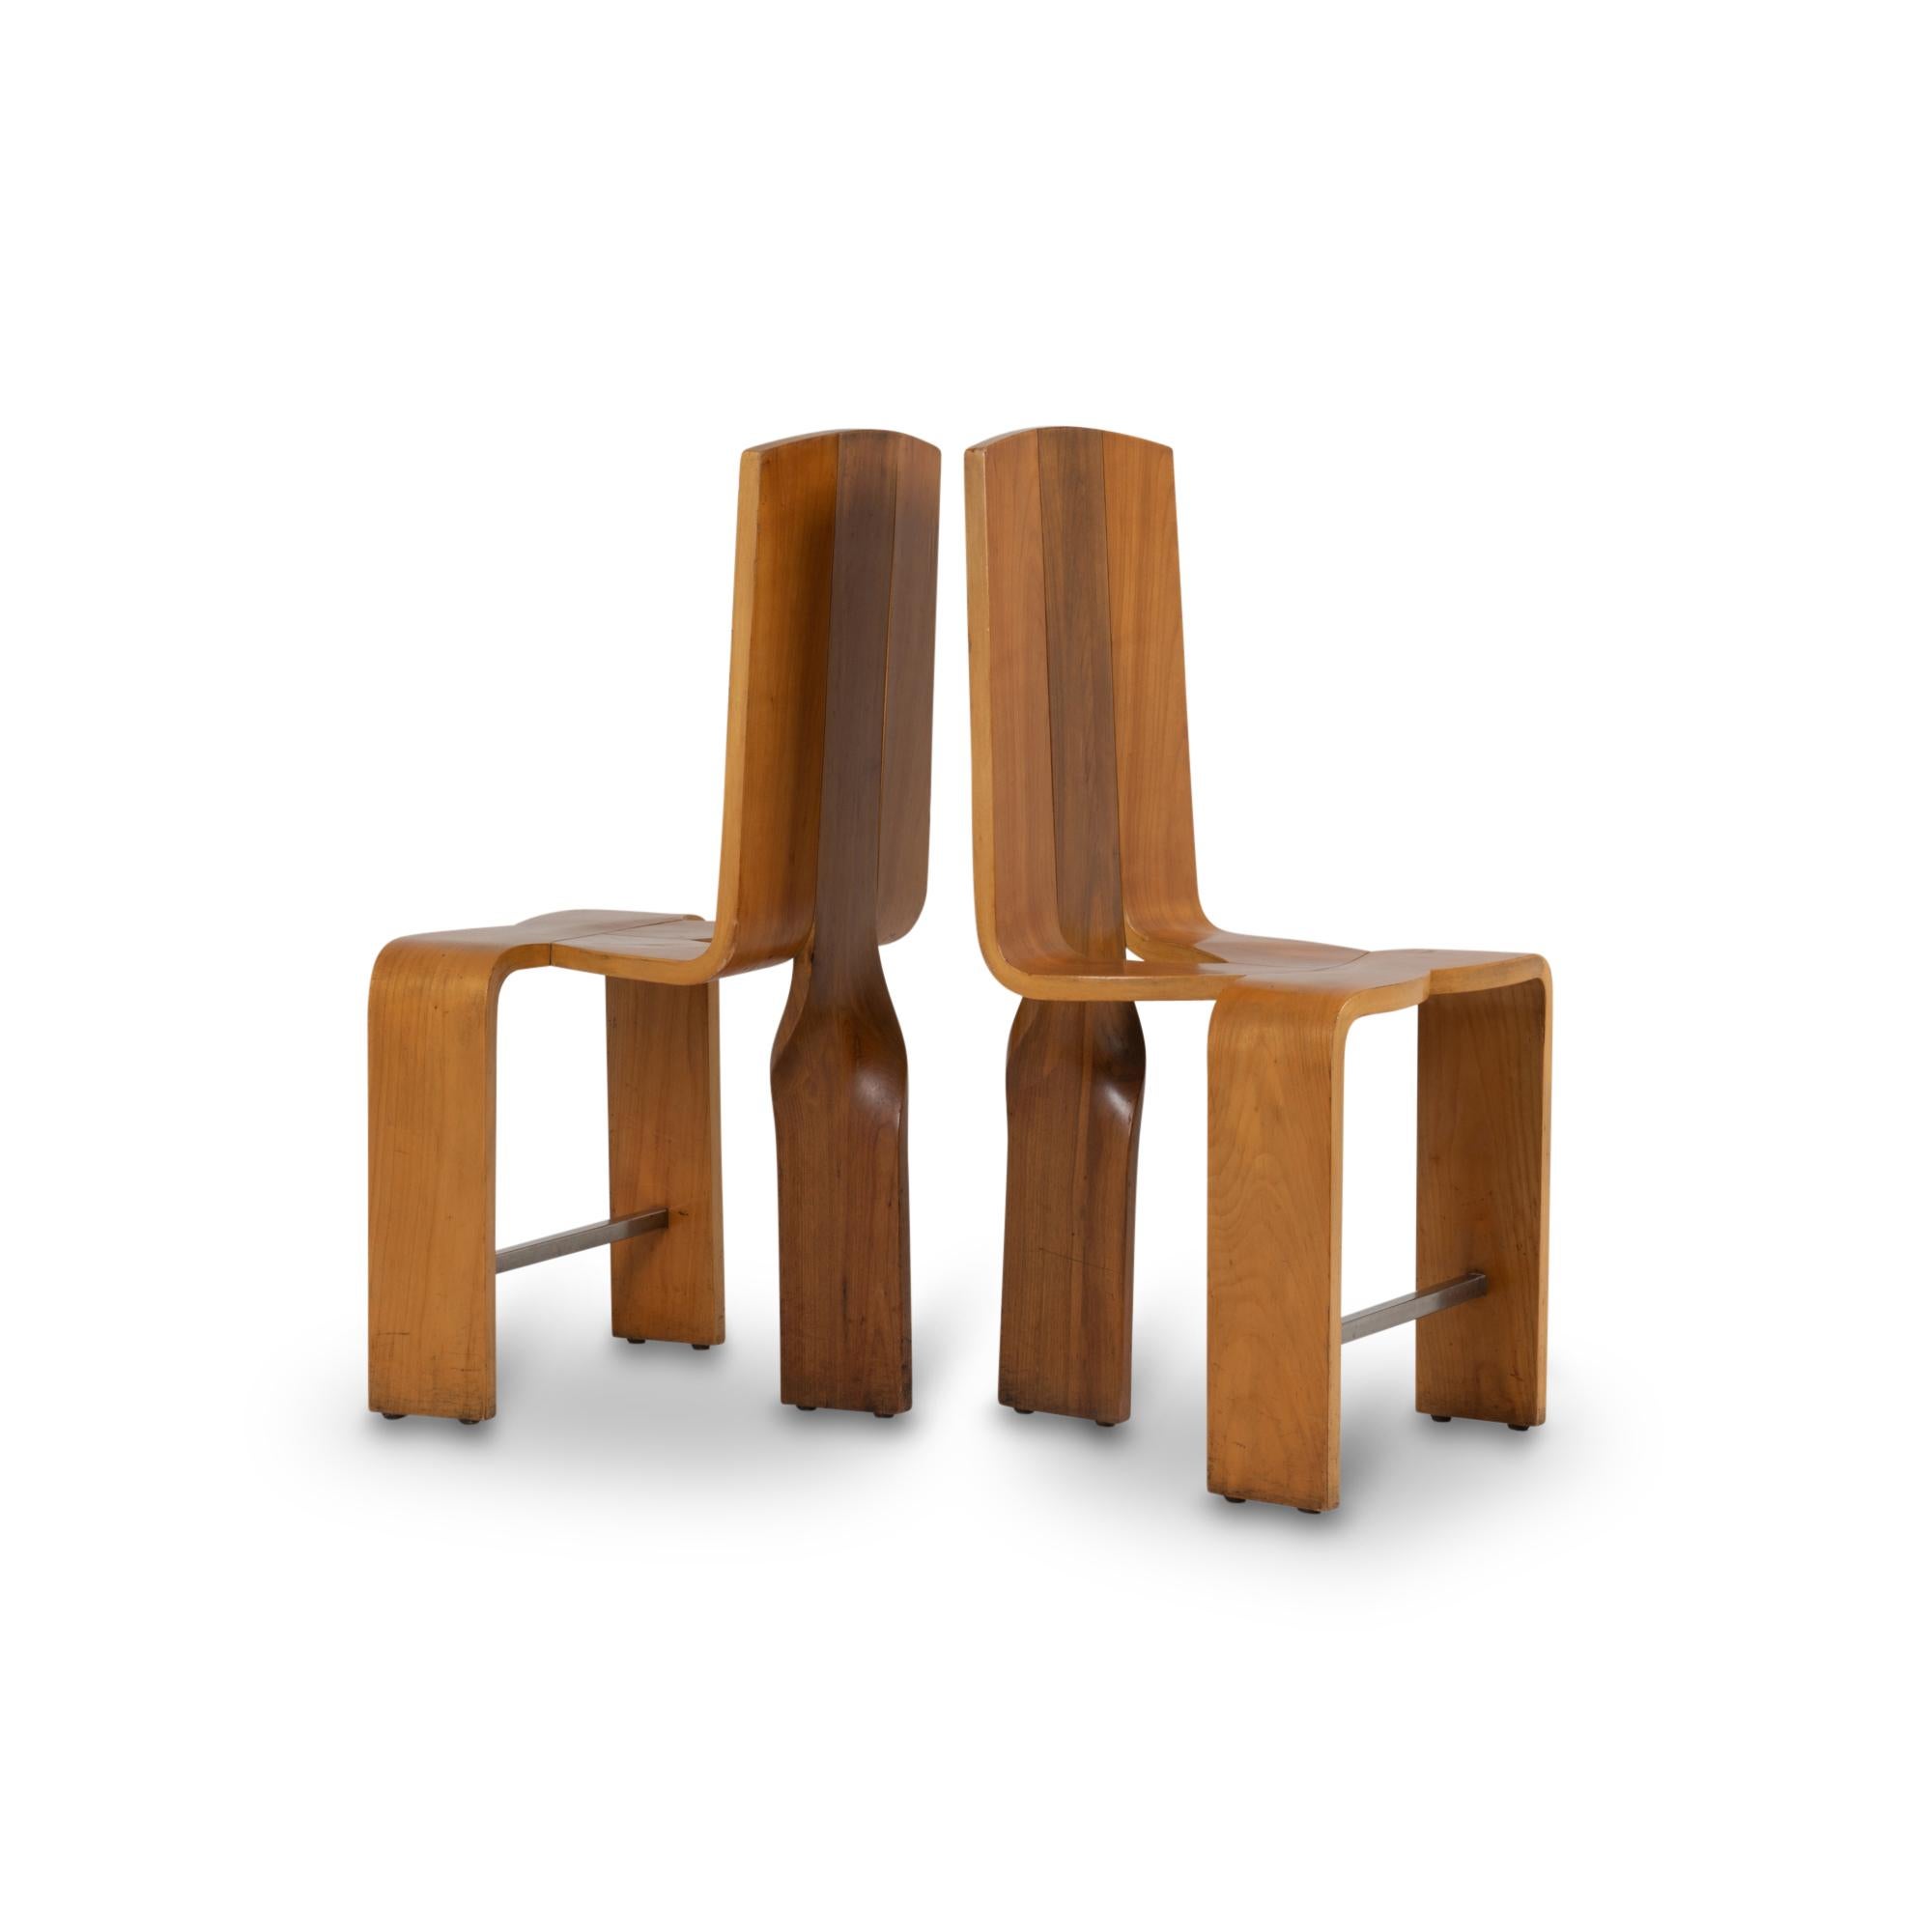 20th Century Series of Eight Chairs Blond Cherry Wood, 1980s For Sale